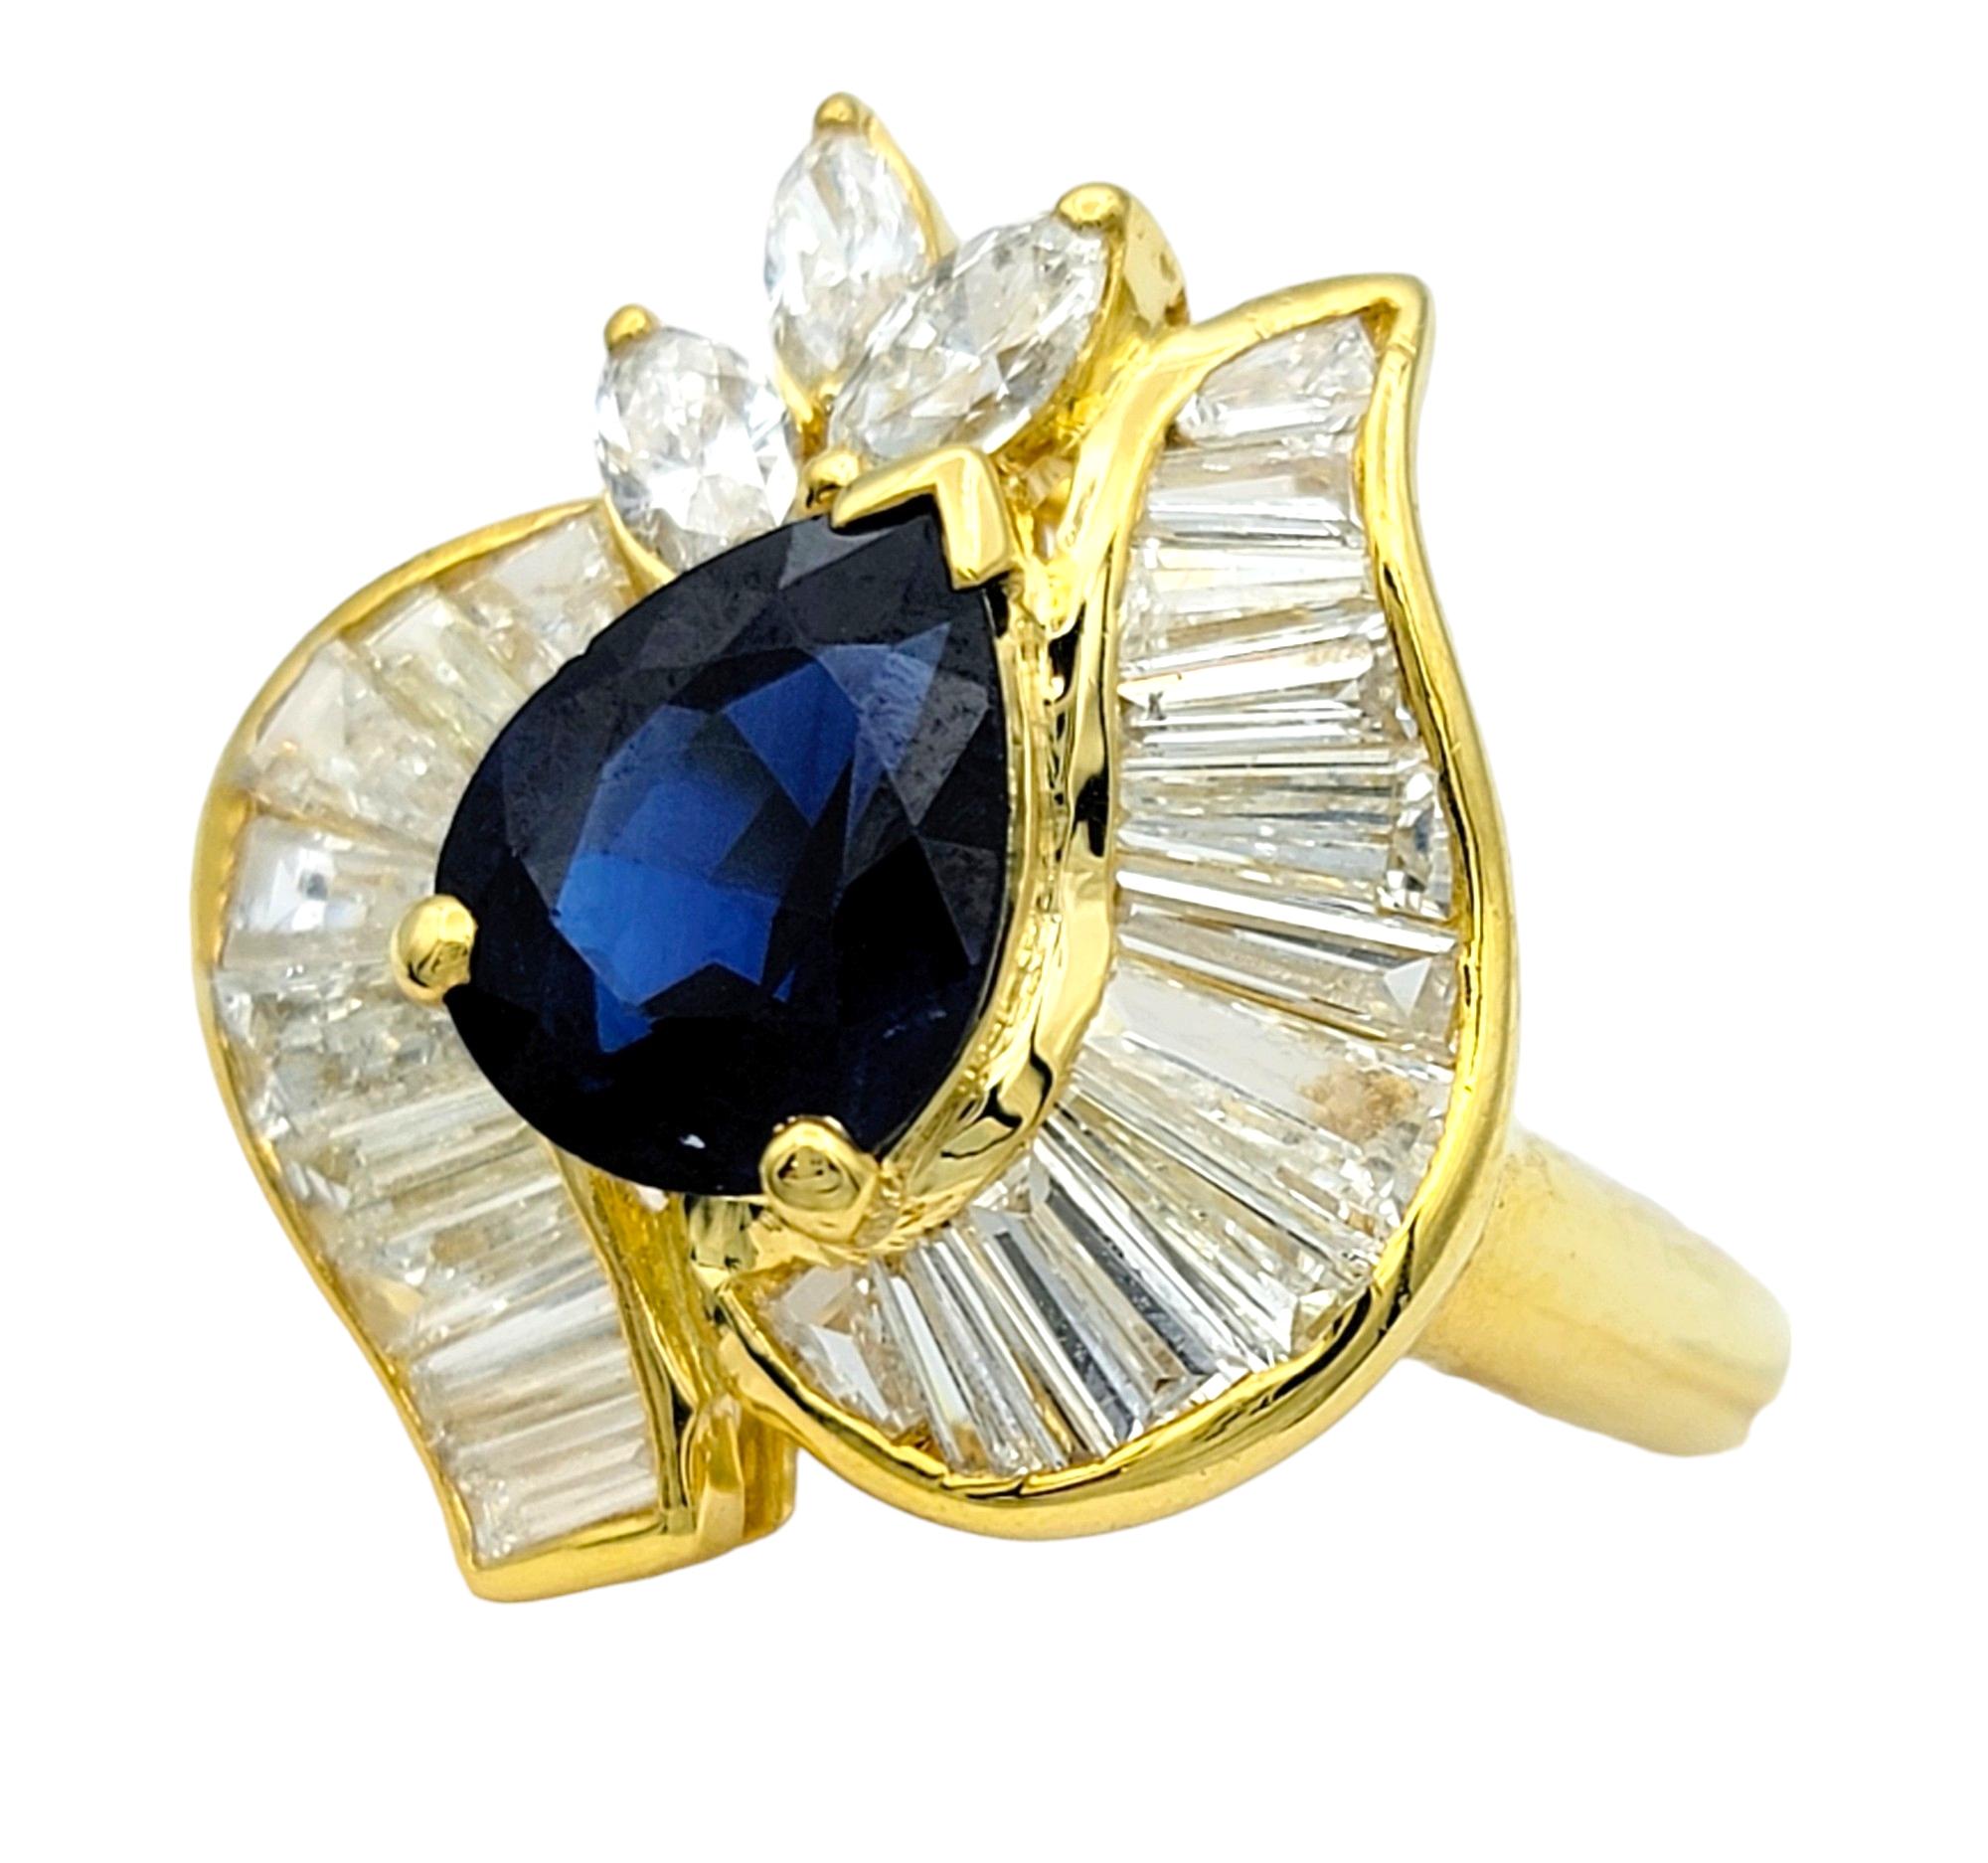 Contemporary Pear Cut Blue Sapphire Ring with Baguette and Marquise Diamonds in 18 Karat Gold